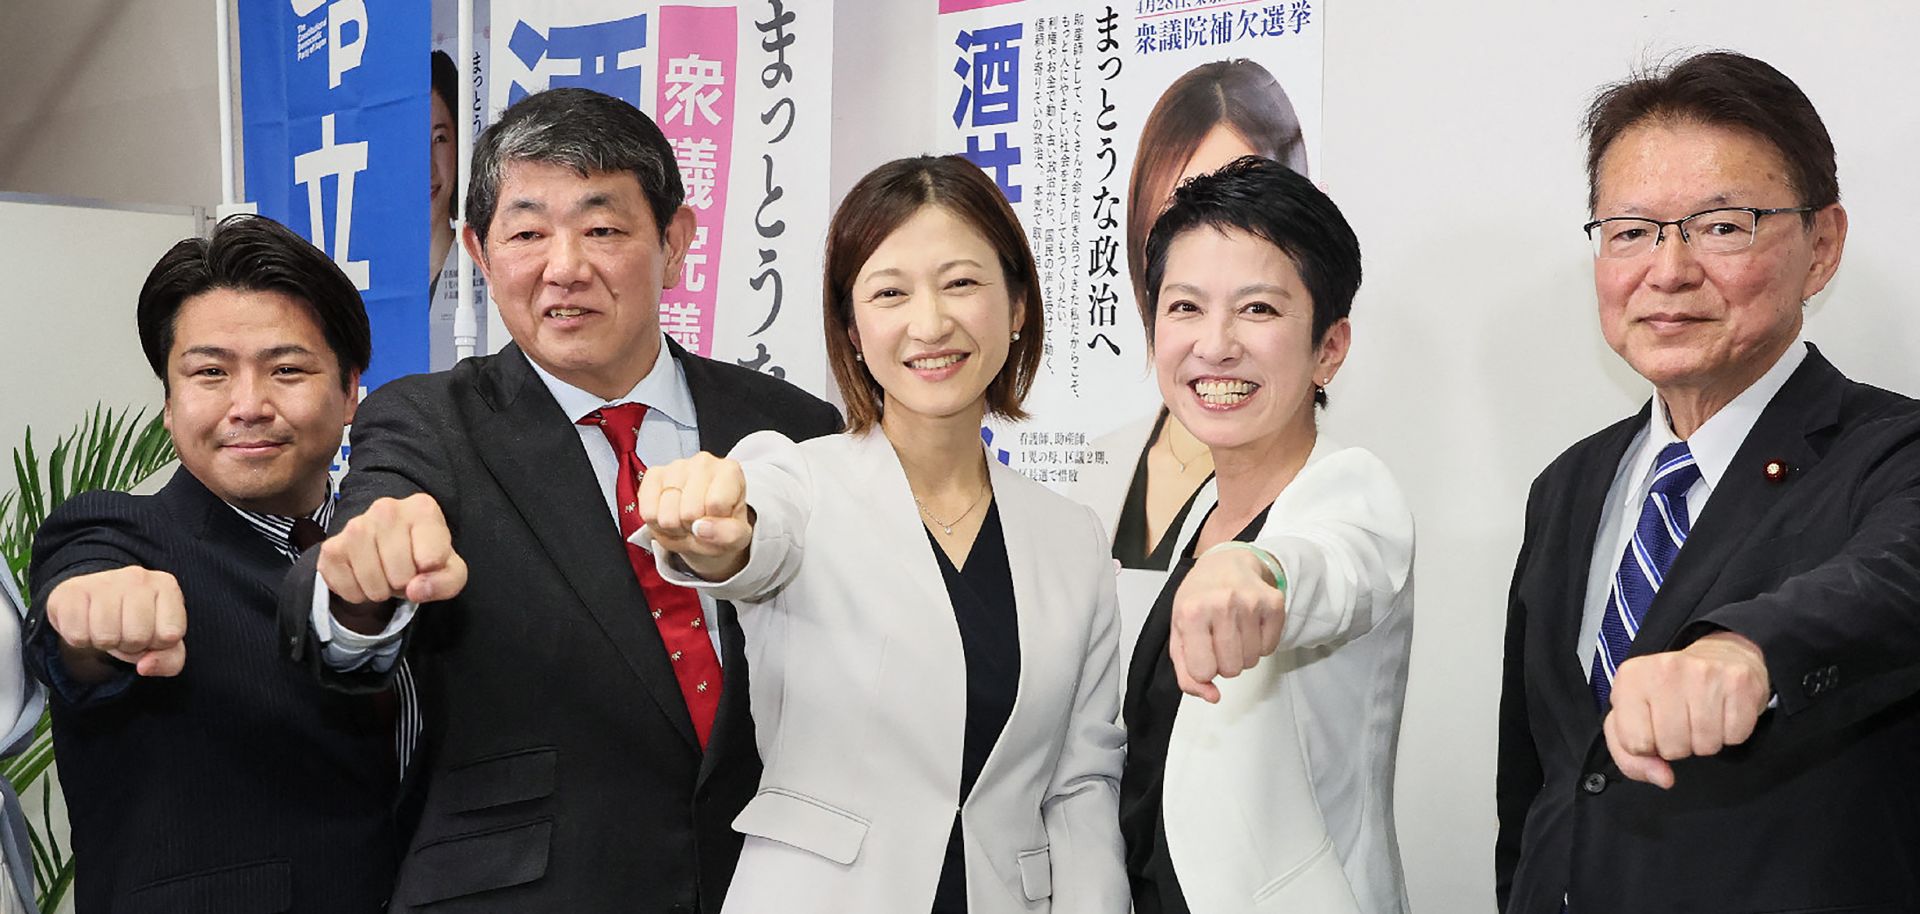 Natsumi Sakai (C) of the main opposition Constitutional Democratic Party of Japan poses with others after receiving news that she won the by-election for the Tokyo No. 15 district seat for the lower house, in Tokyo, Japan, on April 28, 2024.